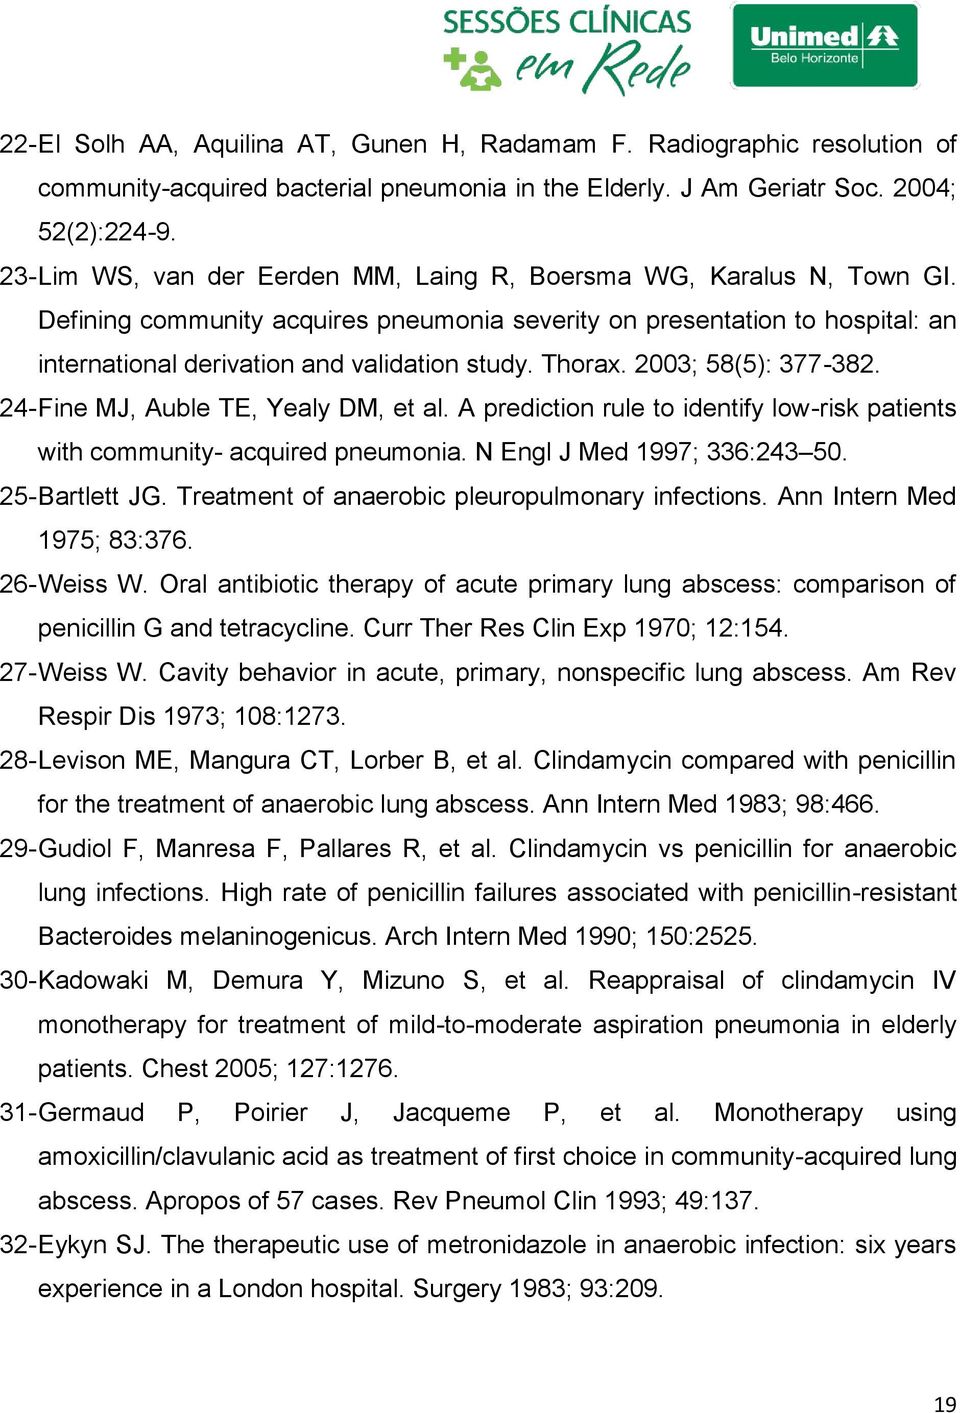 Thorax. 2003; 58(5): 377-382. 24- Fine MJ, Auble TE, Yealy DM, et al. A prediction rule to identify low-risk patients with community- acquired pneumonia. N Engl J Med 1997; 336:243 50.